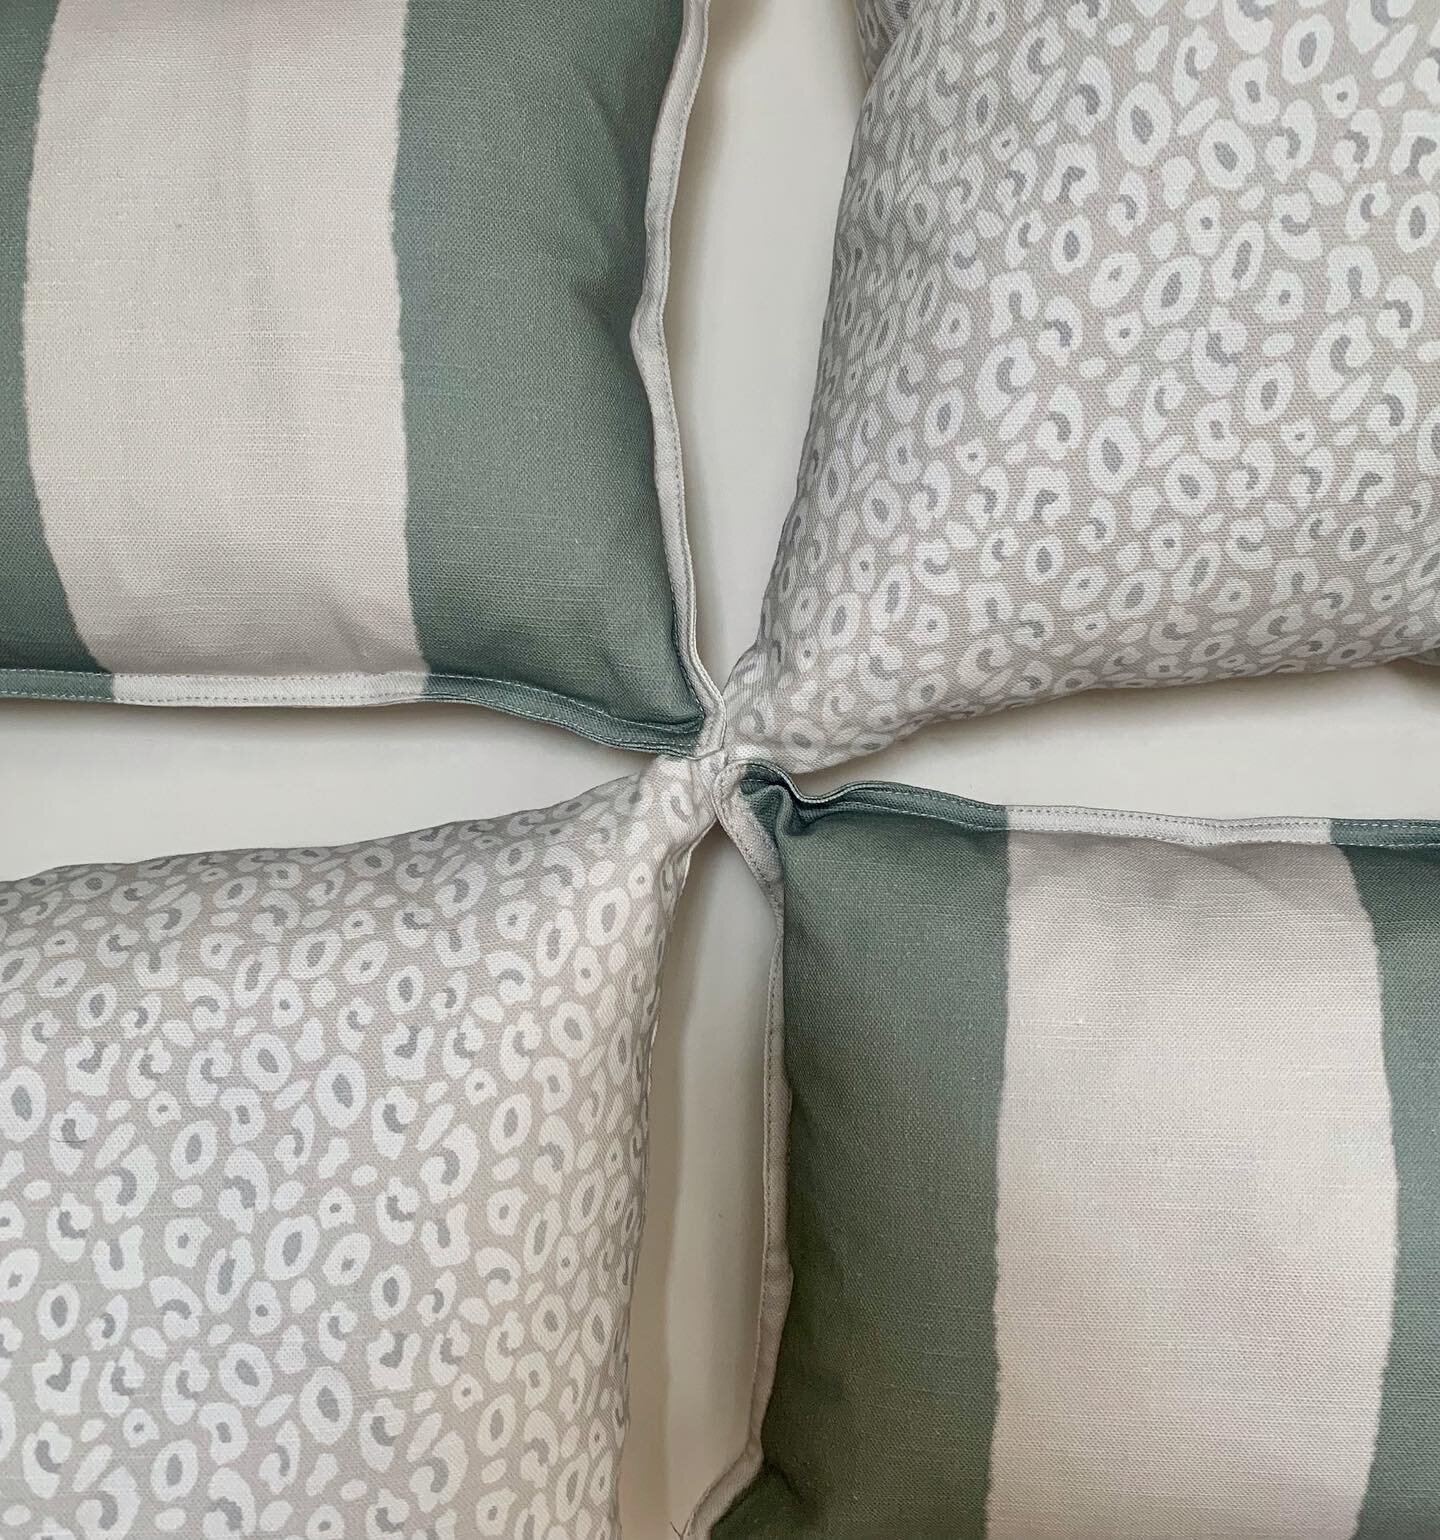 &bull; N E W &bull; 
Here is a sneak peek of our NEW products coming soon. These are our NEW cushion designs, launching in our &lsquo;Khaki Stripe&rsquo; and our &lsquo;Neutral Leopard Print&rsquo;. What do you think?